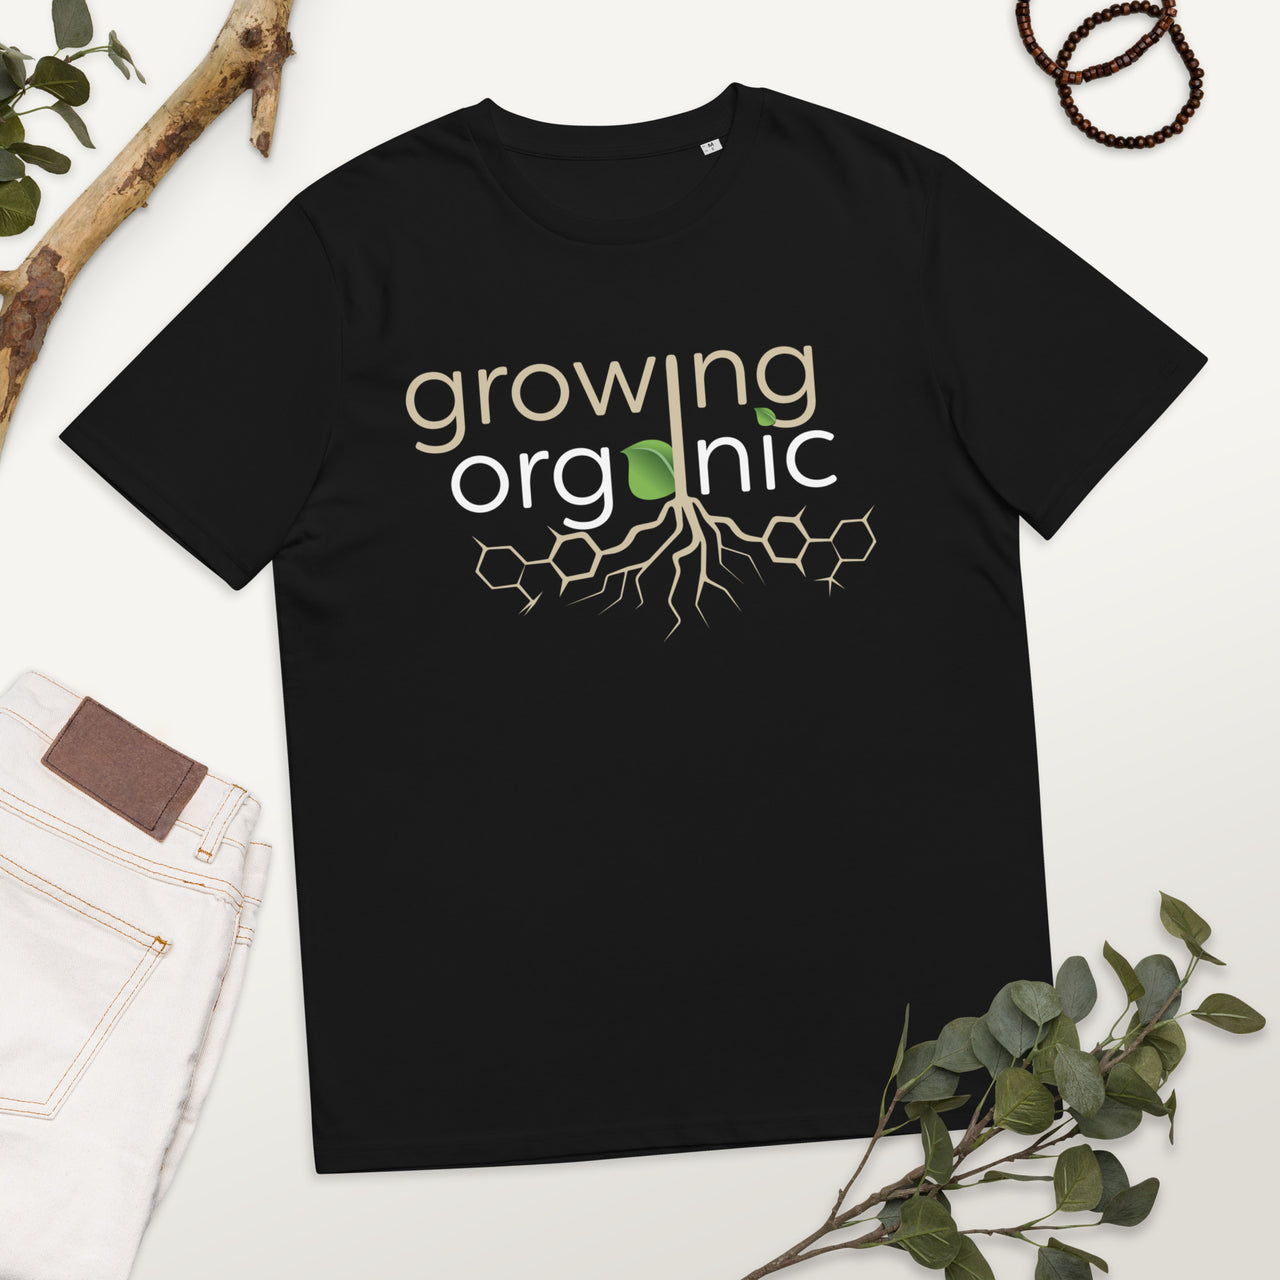 The perfect T-Shirt material: 100% organic quality cotton